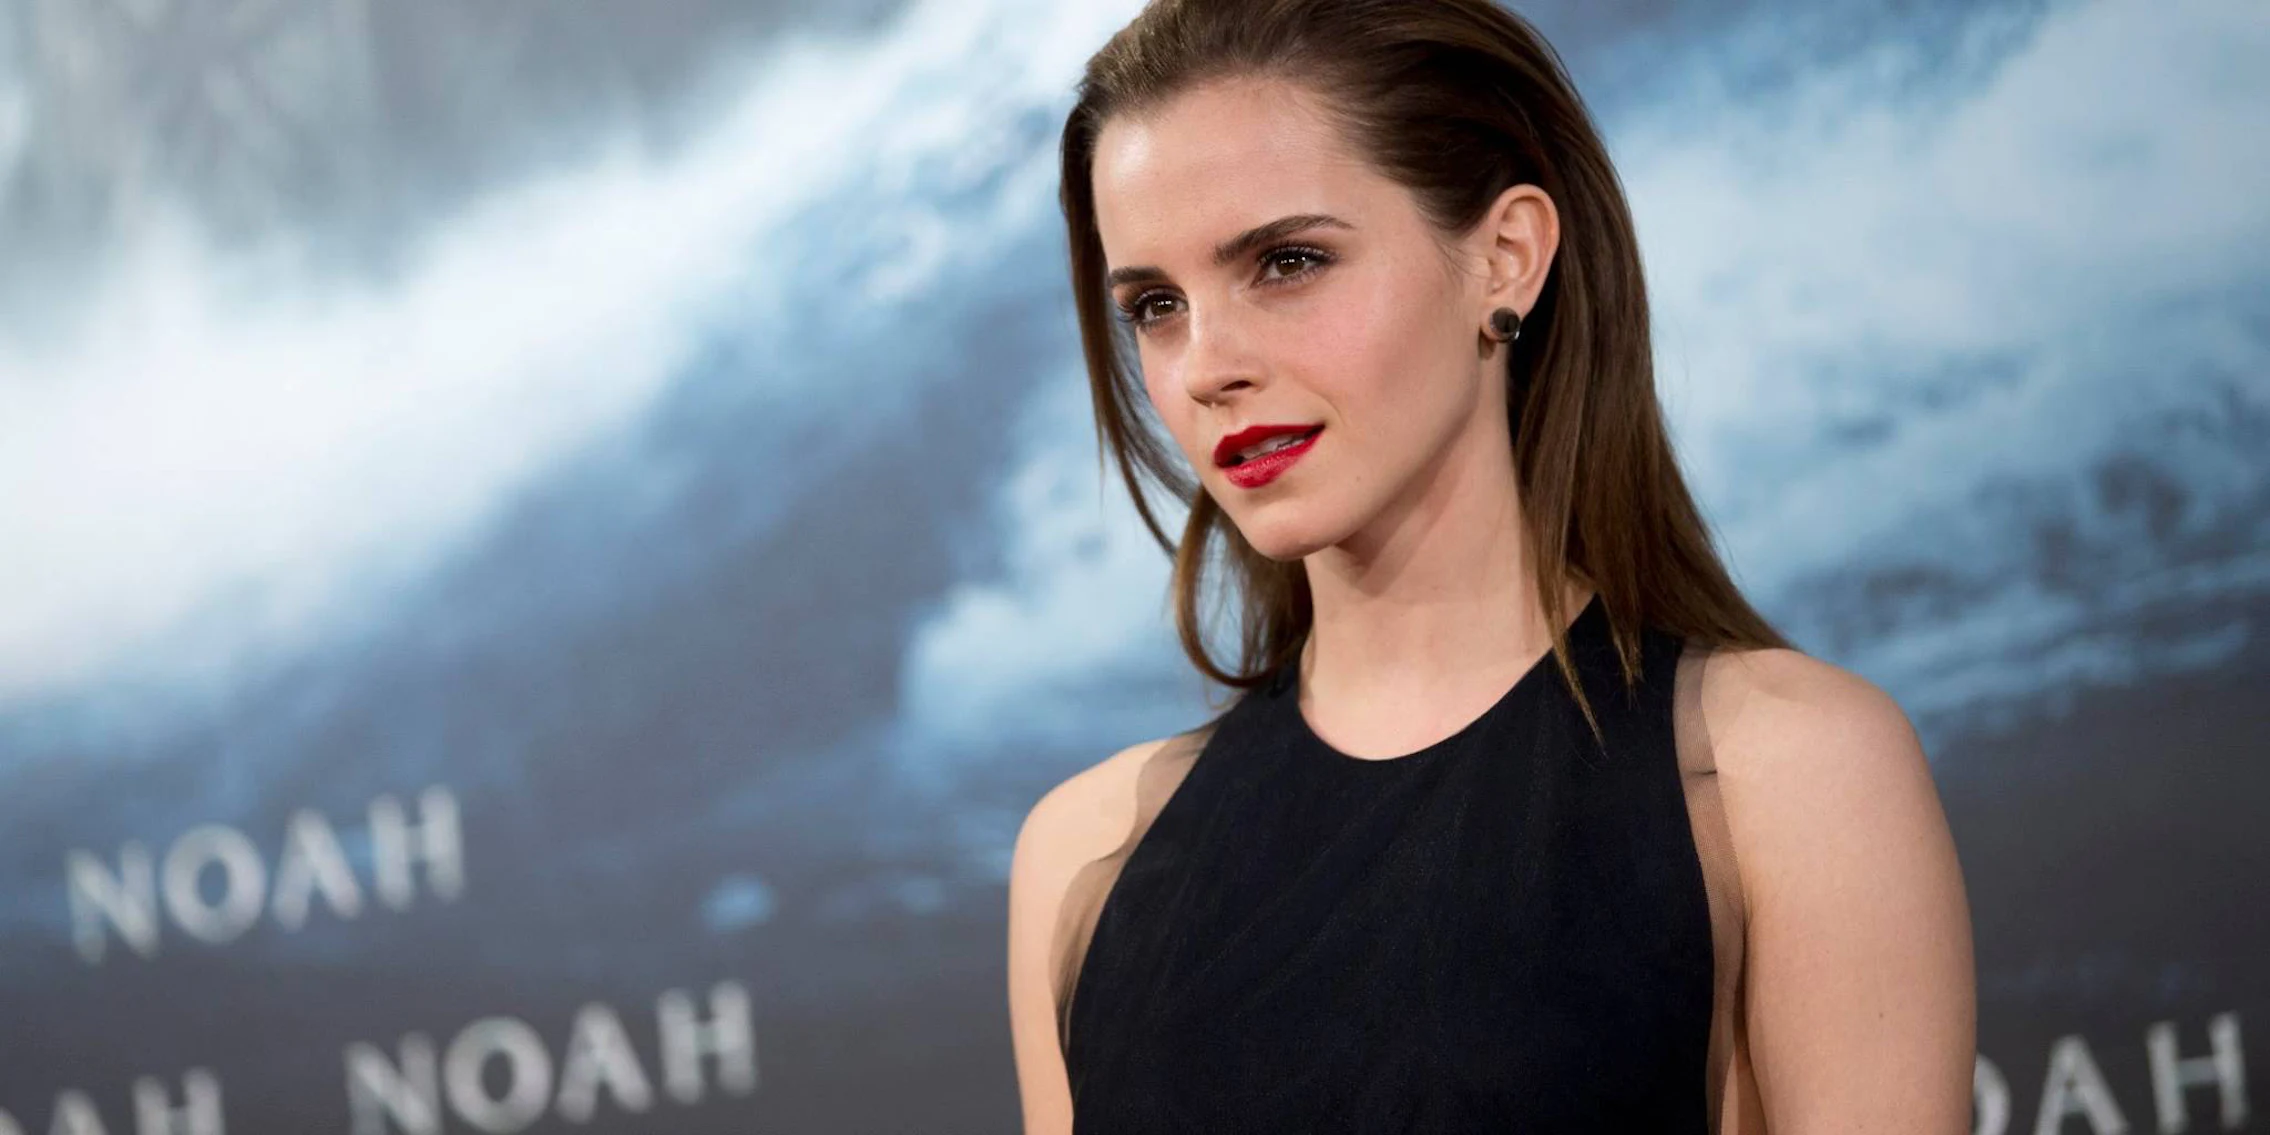 What is the name of the character Emma Watson played in the film 'Noah'?